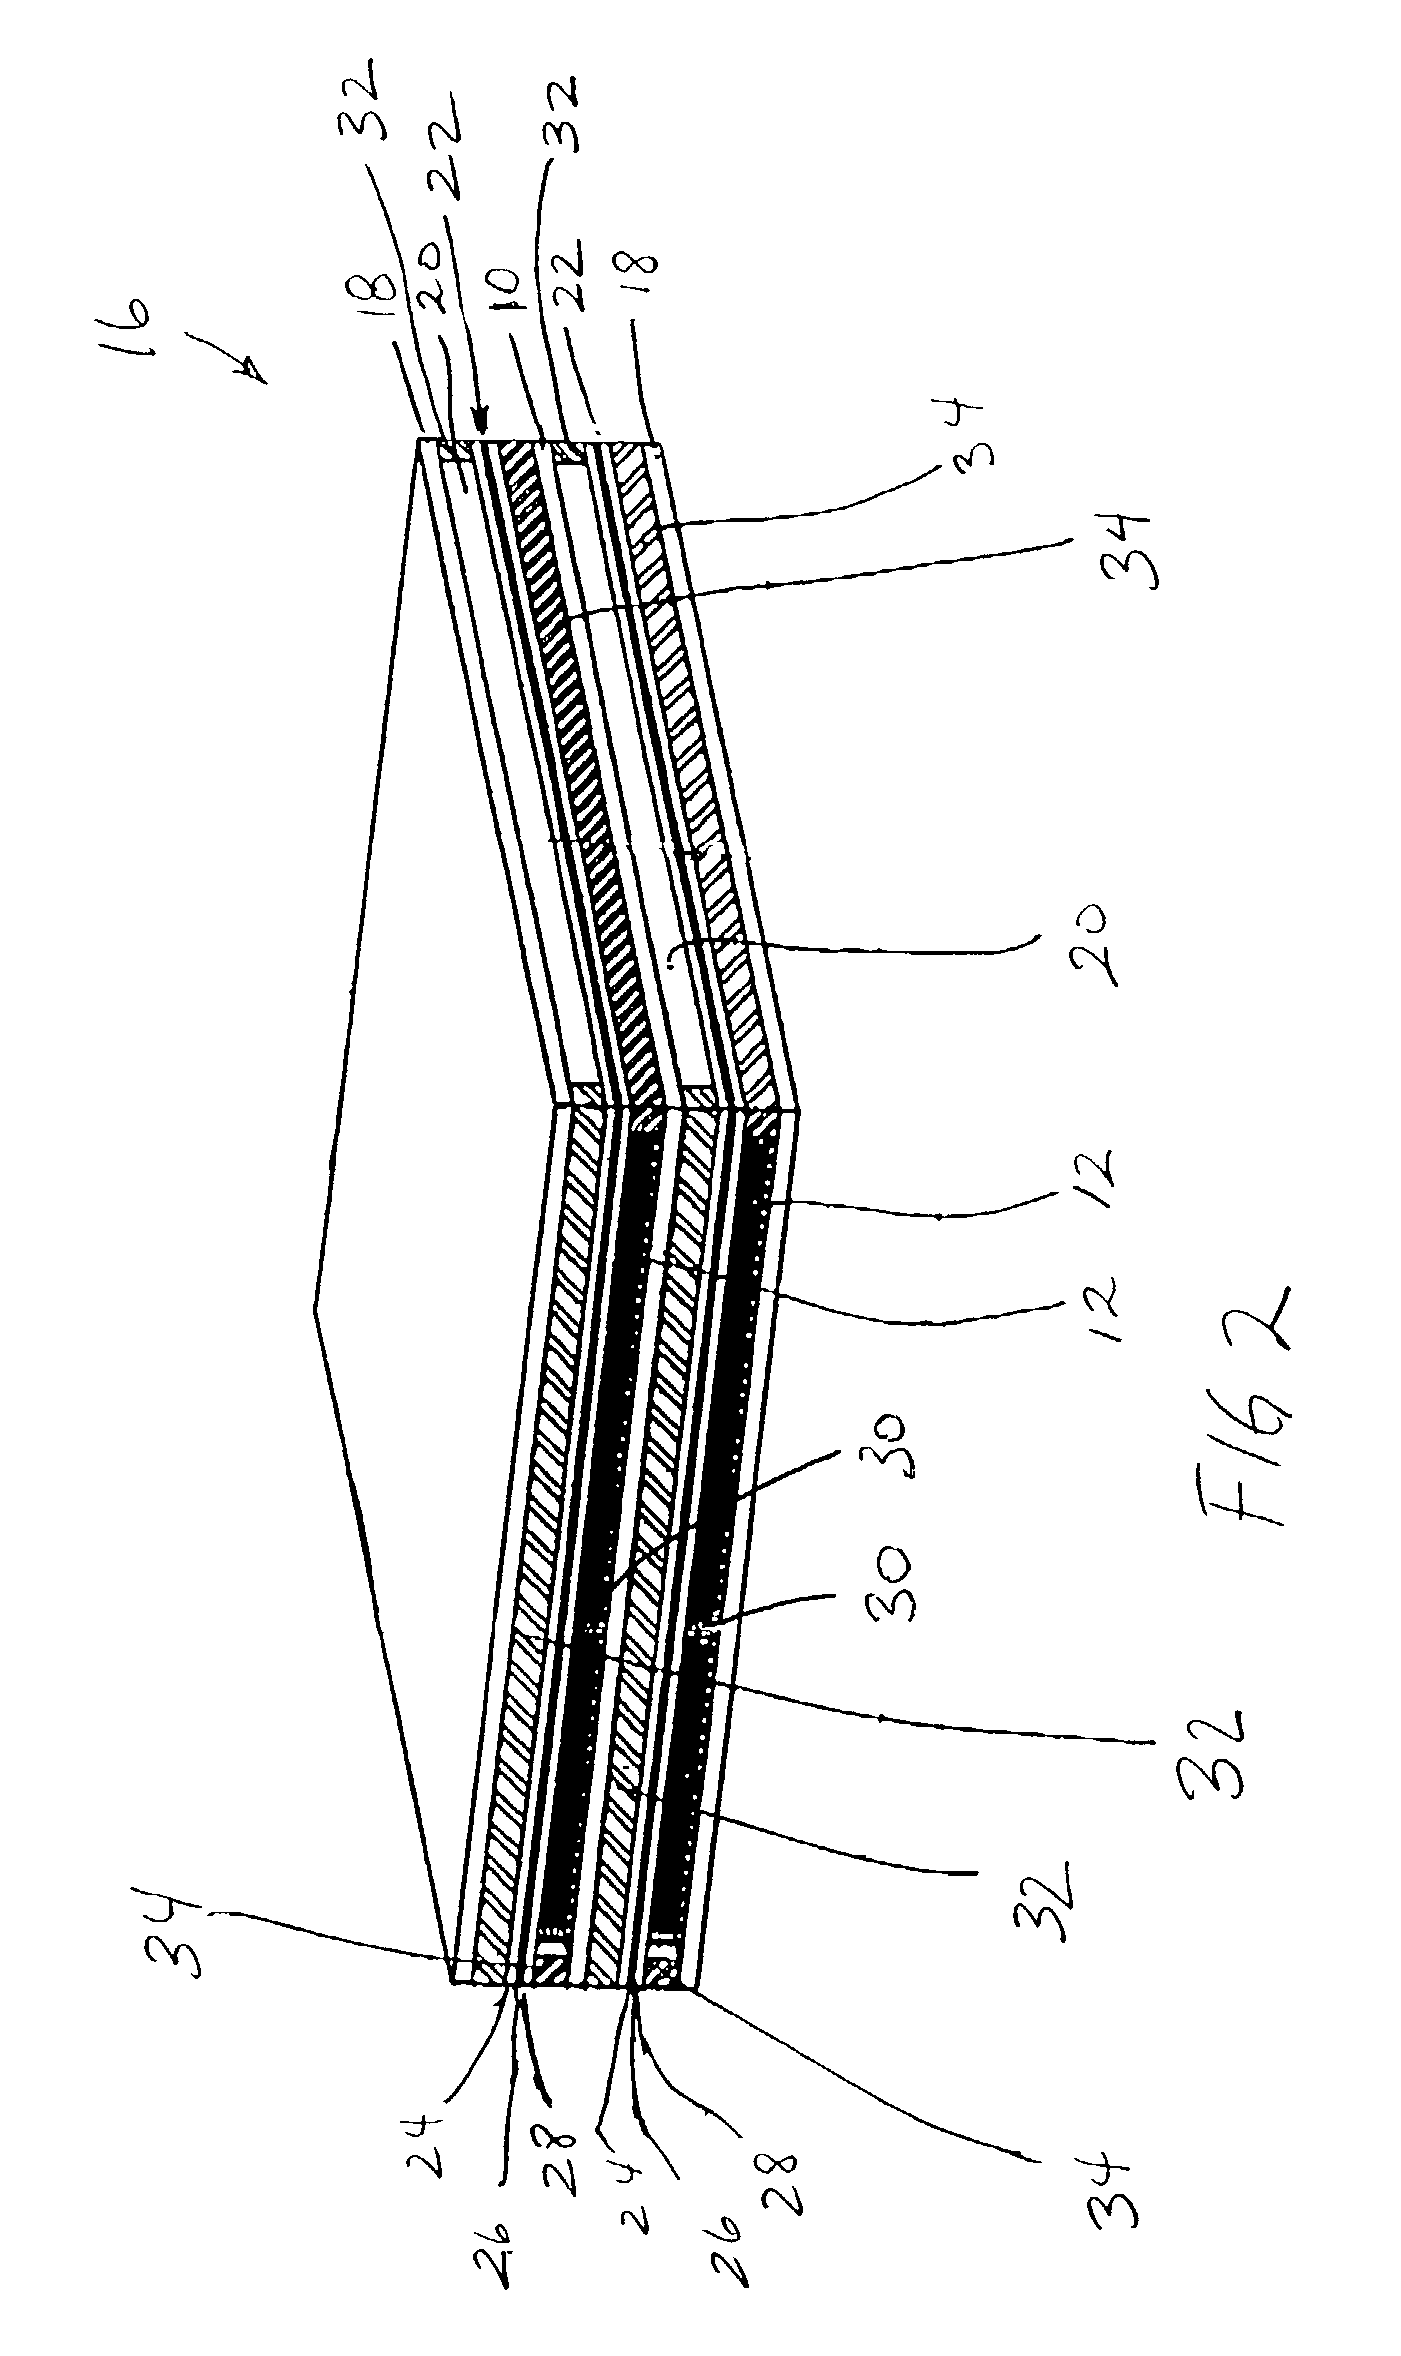 Interconnect for solid oxide fuel cells